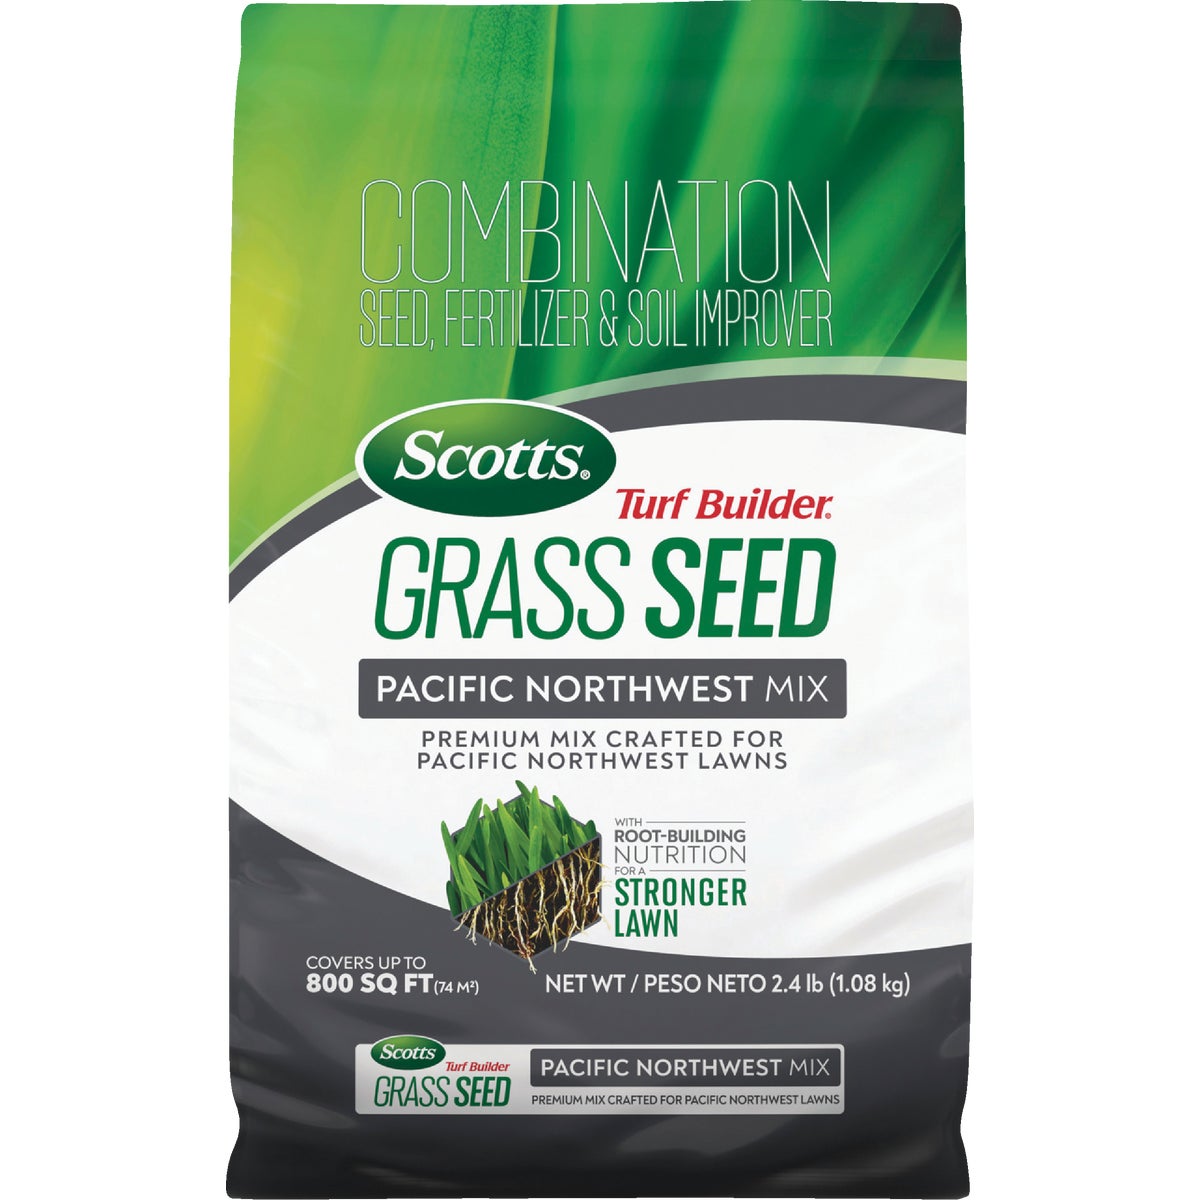 Scotts Turf Builder 2.4 Lb. 200 Sq. Ft. Pacific Northwest Mix Grass Seed